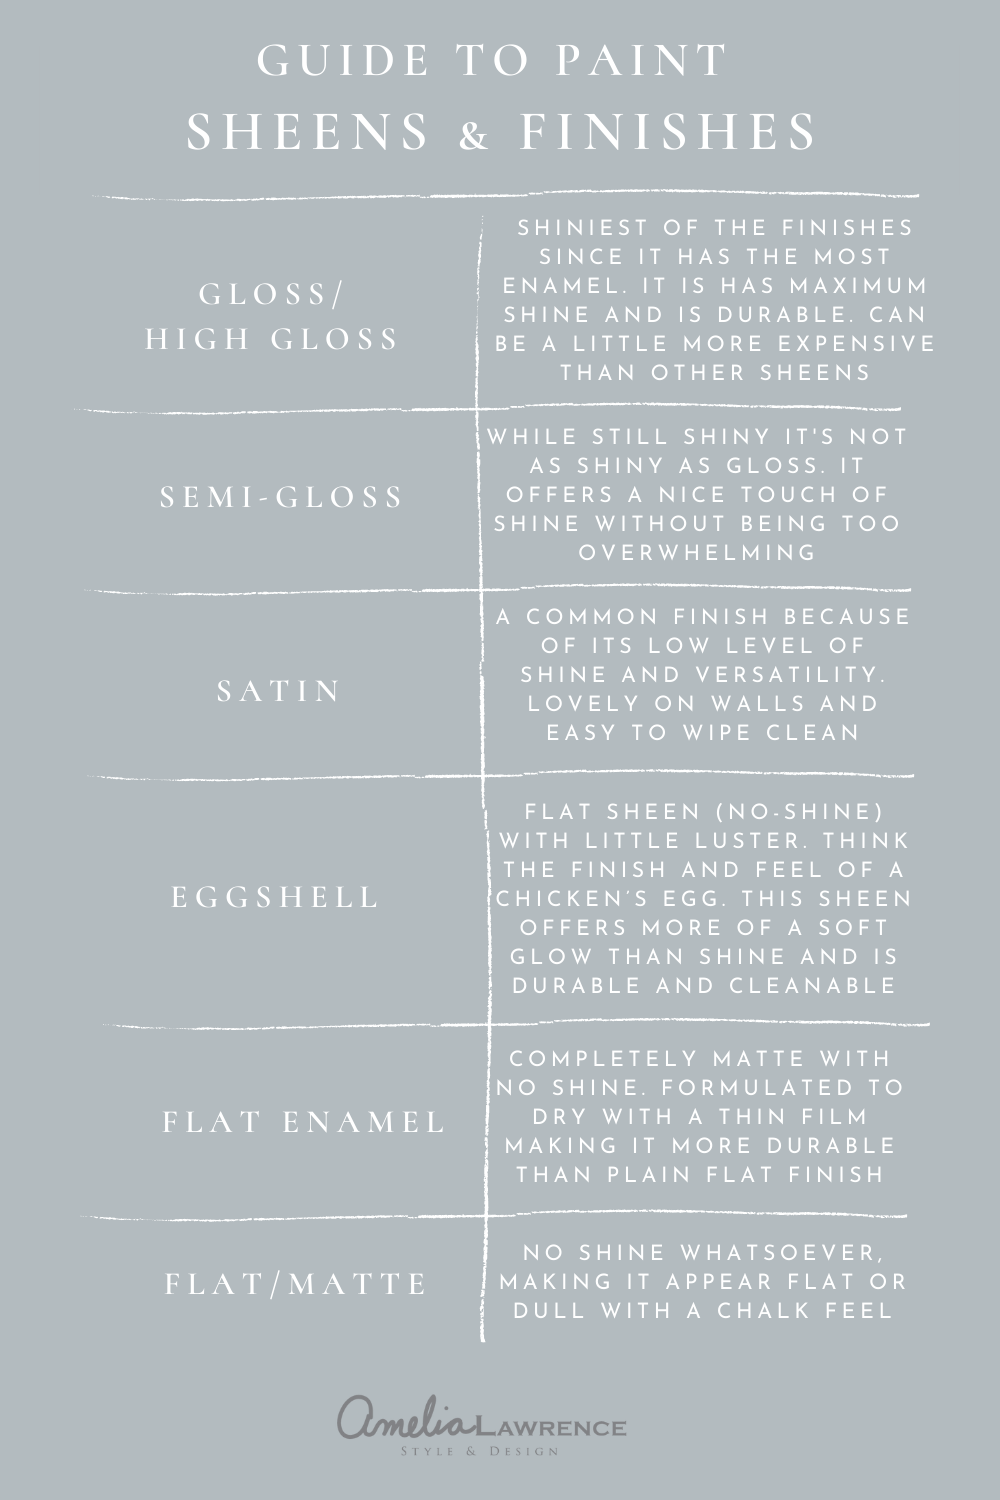 Complete Guide to Paint Sheen & Finishes